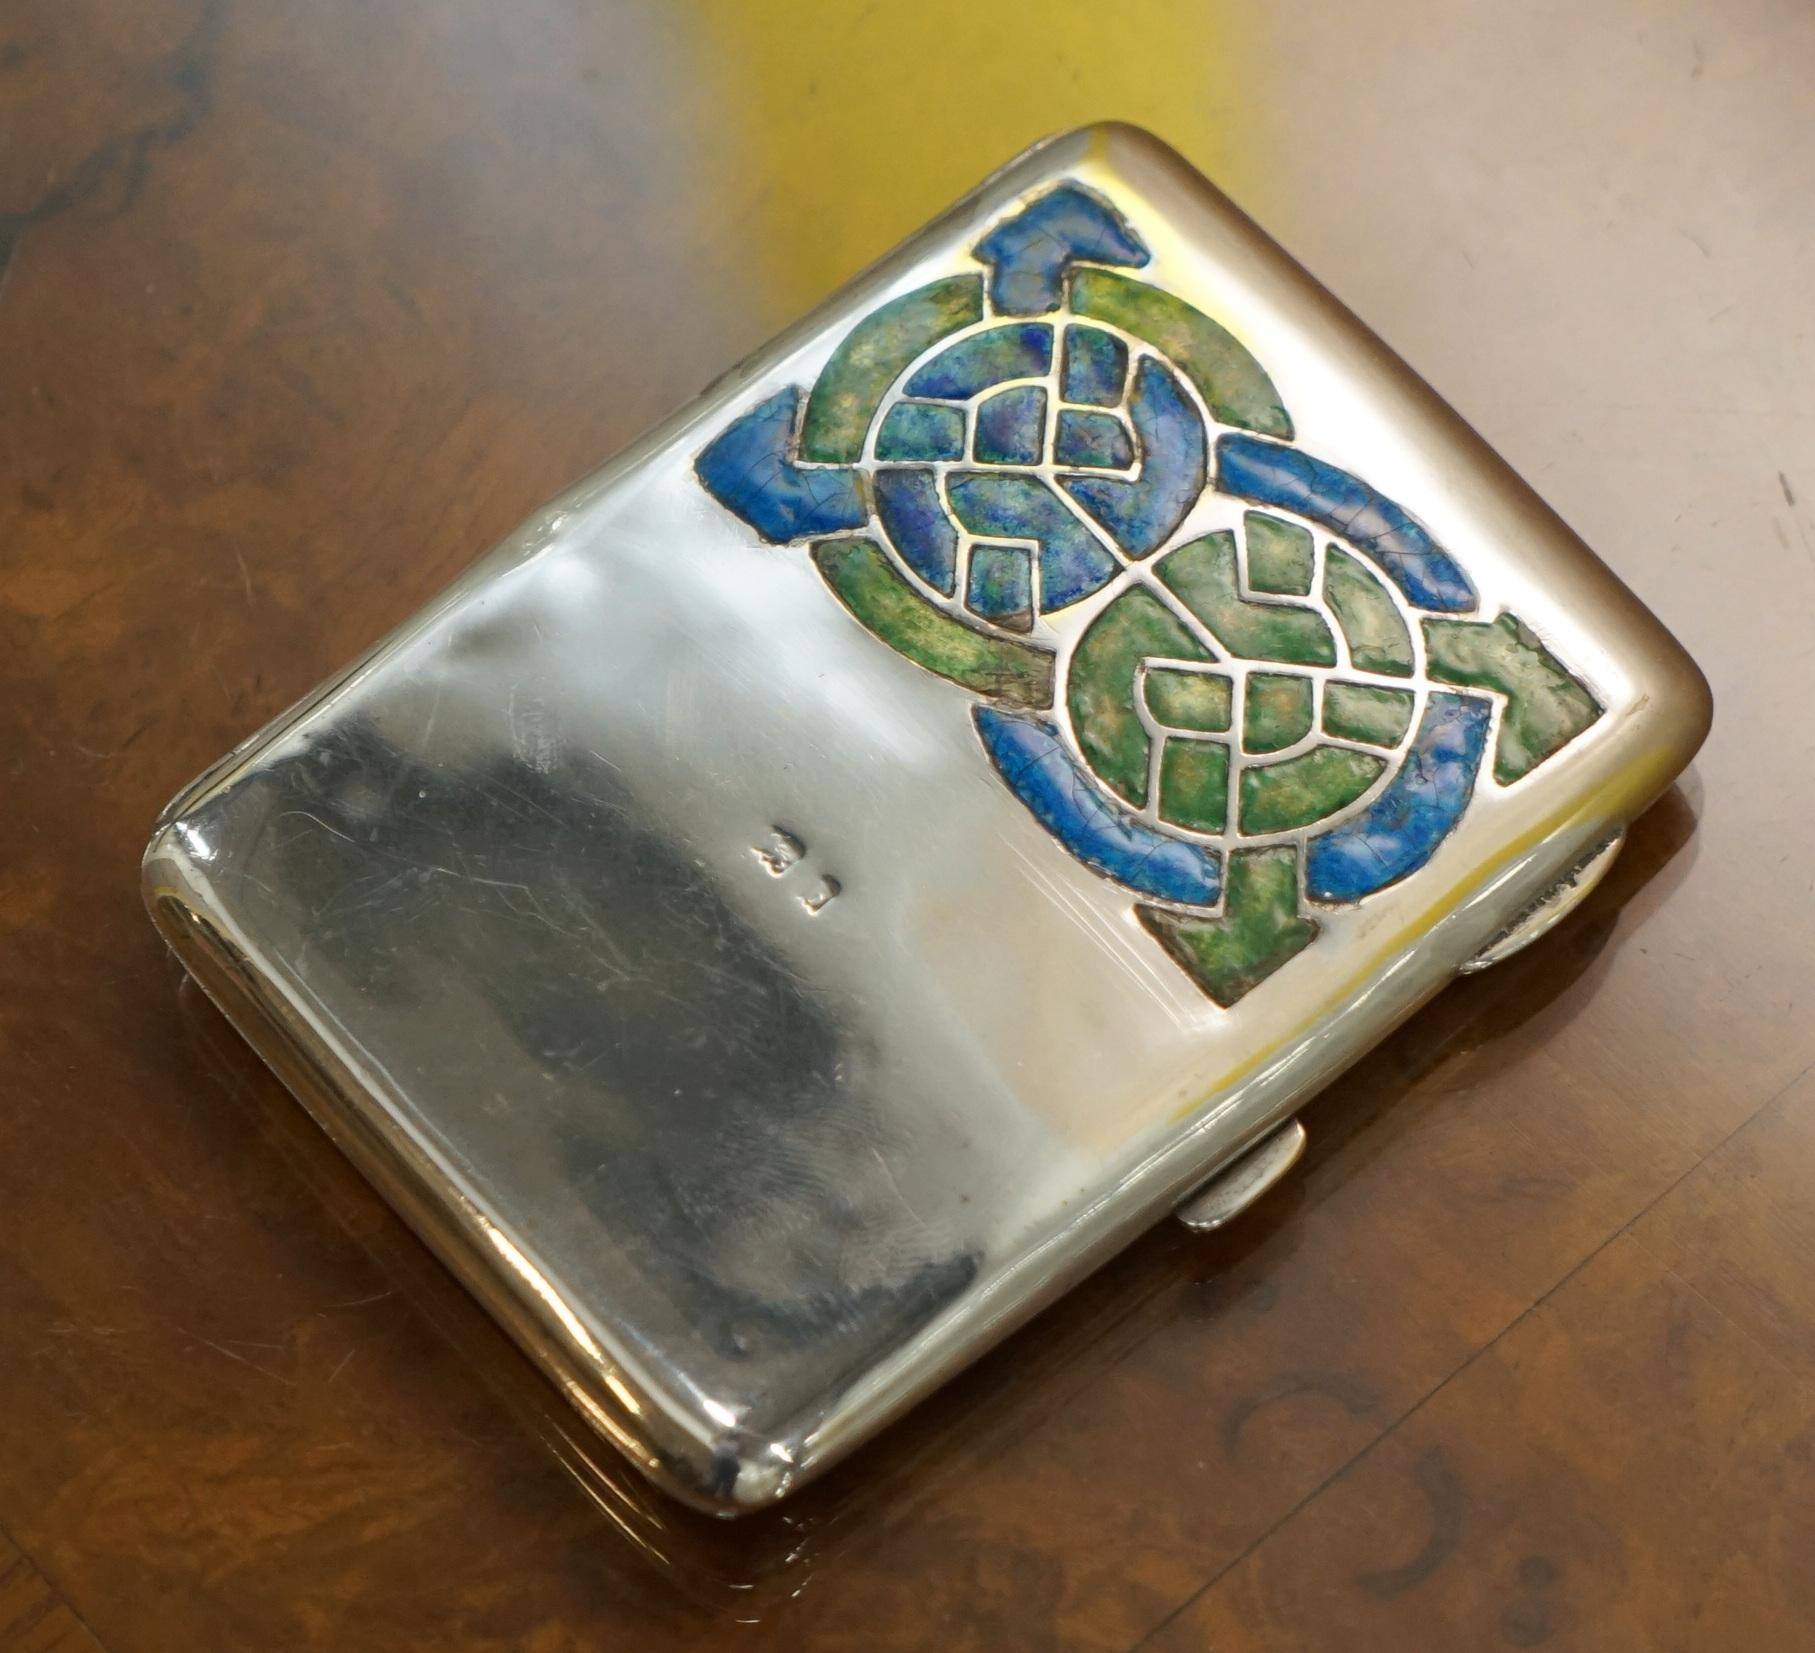 We are delighted to this stunning original 1901 Archibald Knox Cymric Liberty & Co Sterling Silver and Enamel cigarette case

A stunning and very collectable piece of Liberty’s sterling silver and Enamel made by the great Archibald Knox

The